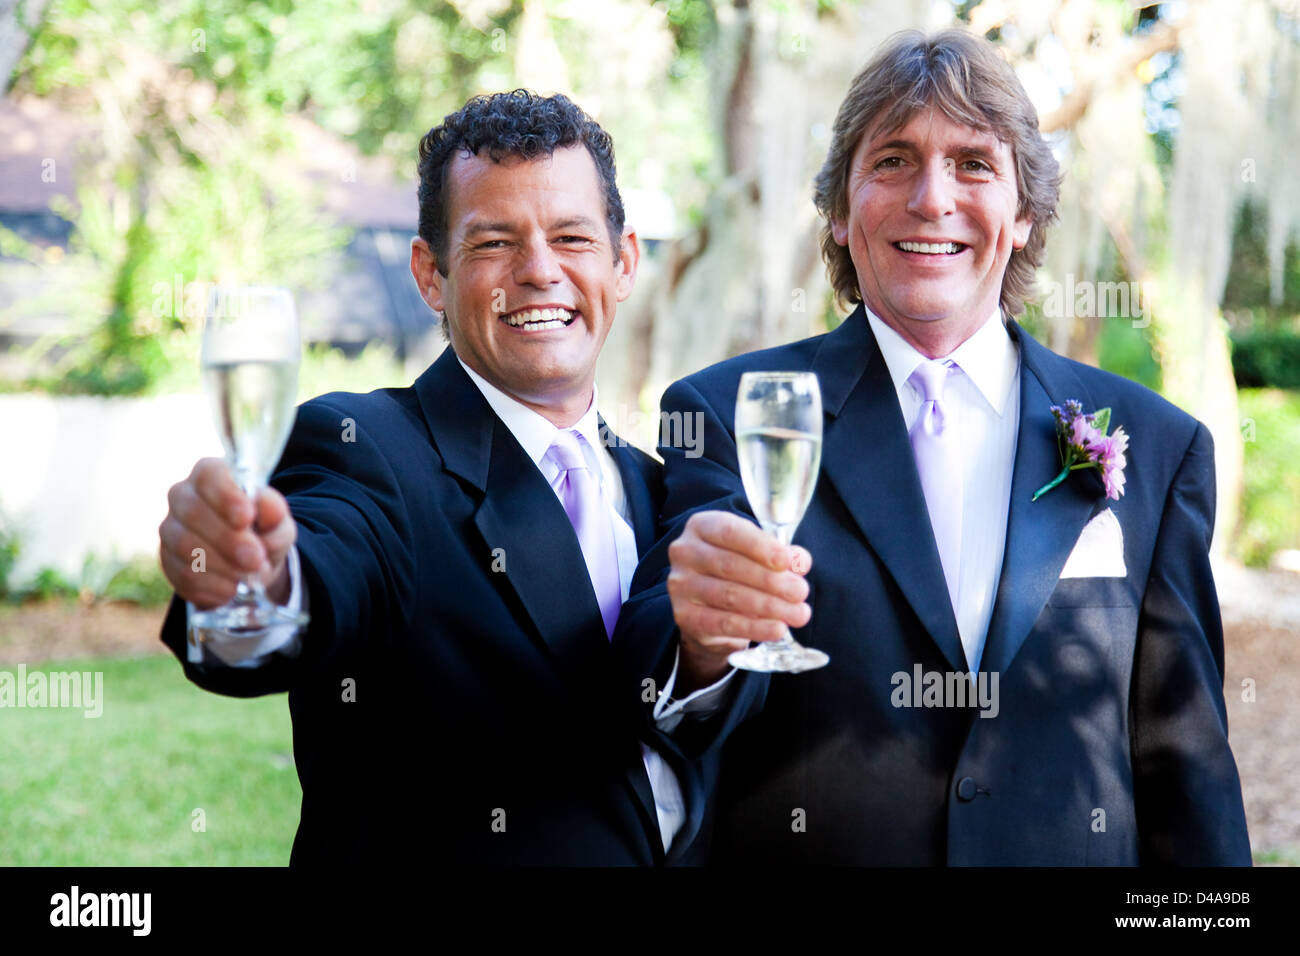 Handsome gay wedding couple toasting their marriage with champagne.  Stock Photo